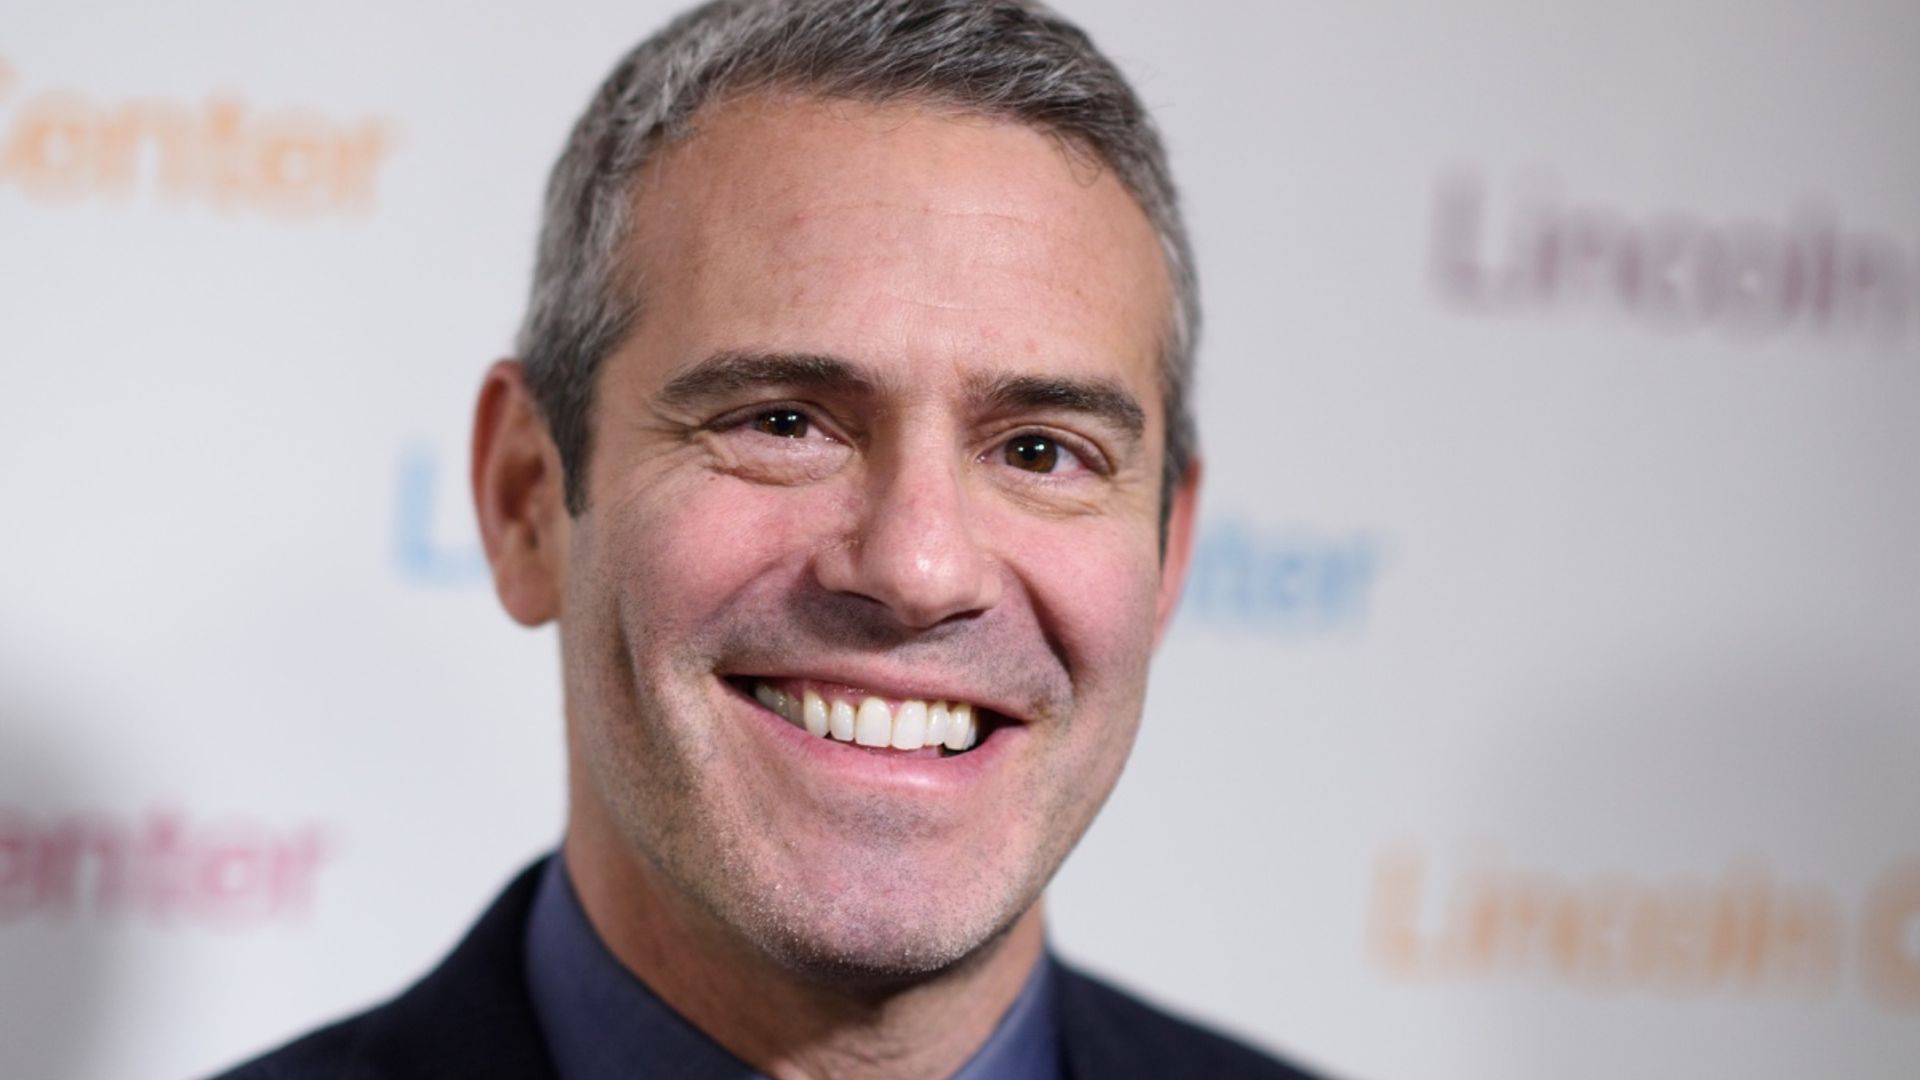 andycohen